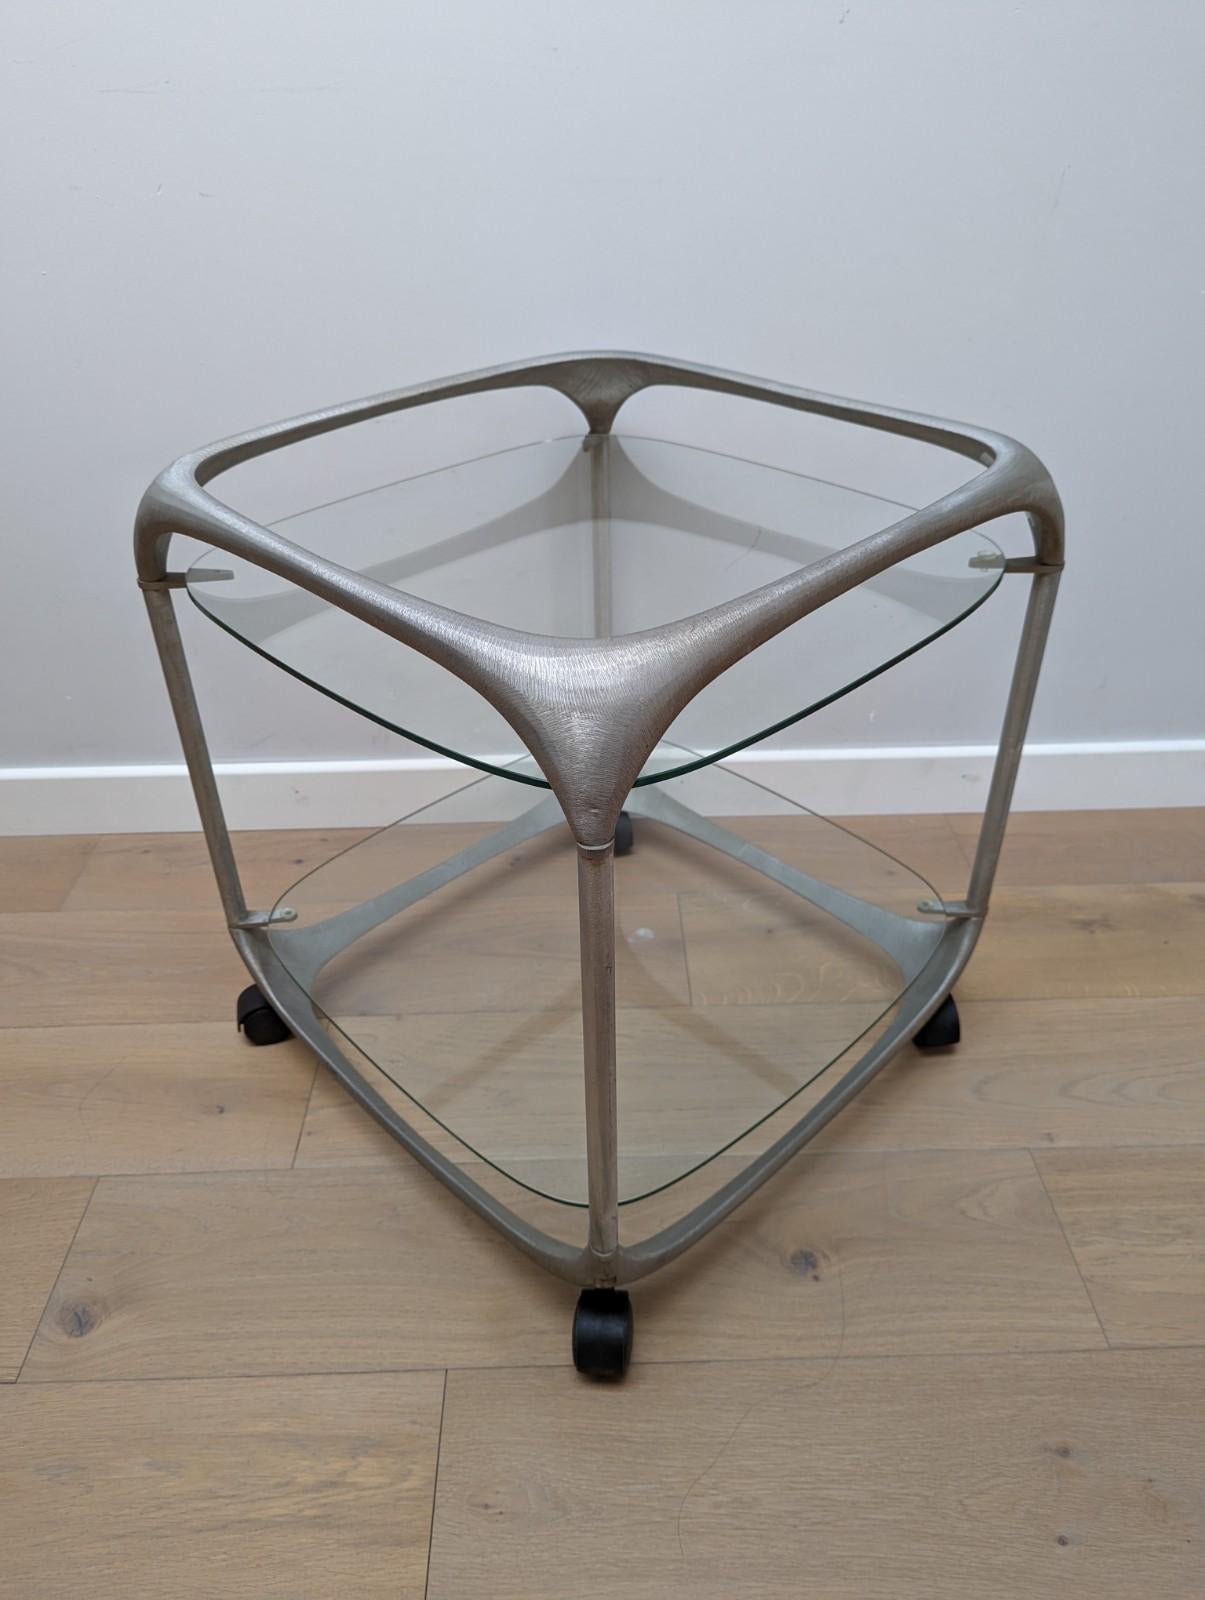 A rare mid-century cube form textured aluminium bar trolley, designed by Lorenzo Burchiellaro. 

Cast Aluminium, with a brushed texture adding depth and interest to the item, with two glass shelves with curved edges which sit on 4 aluminium